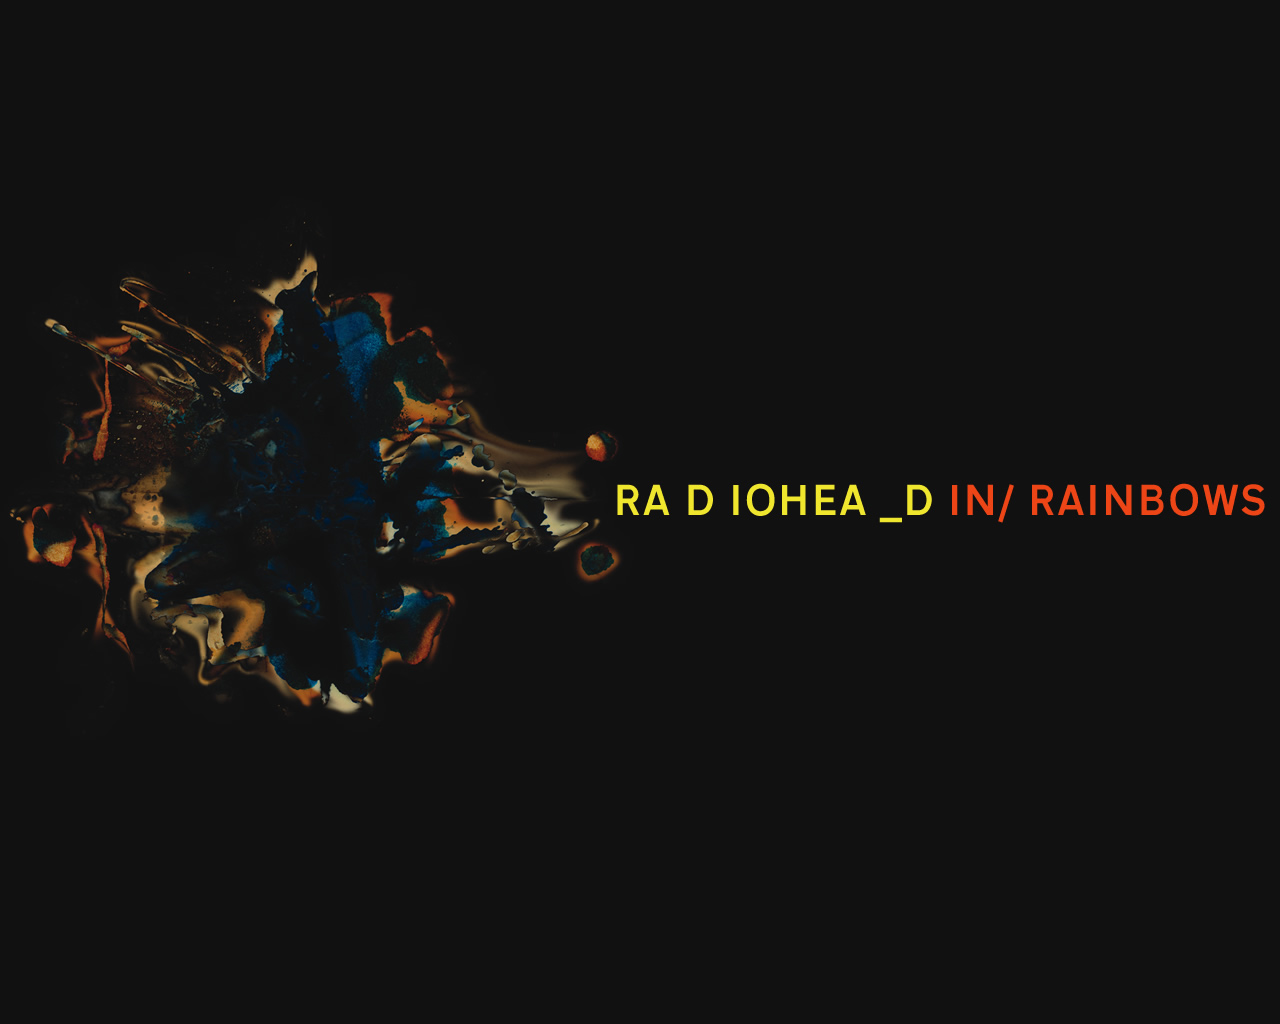 Radiohead Image In Rainbows HD Wallpaper And Background